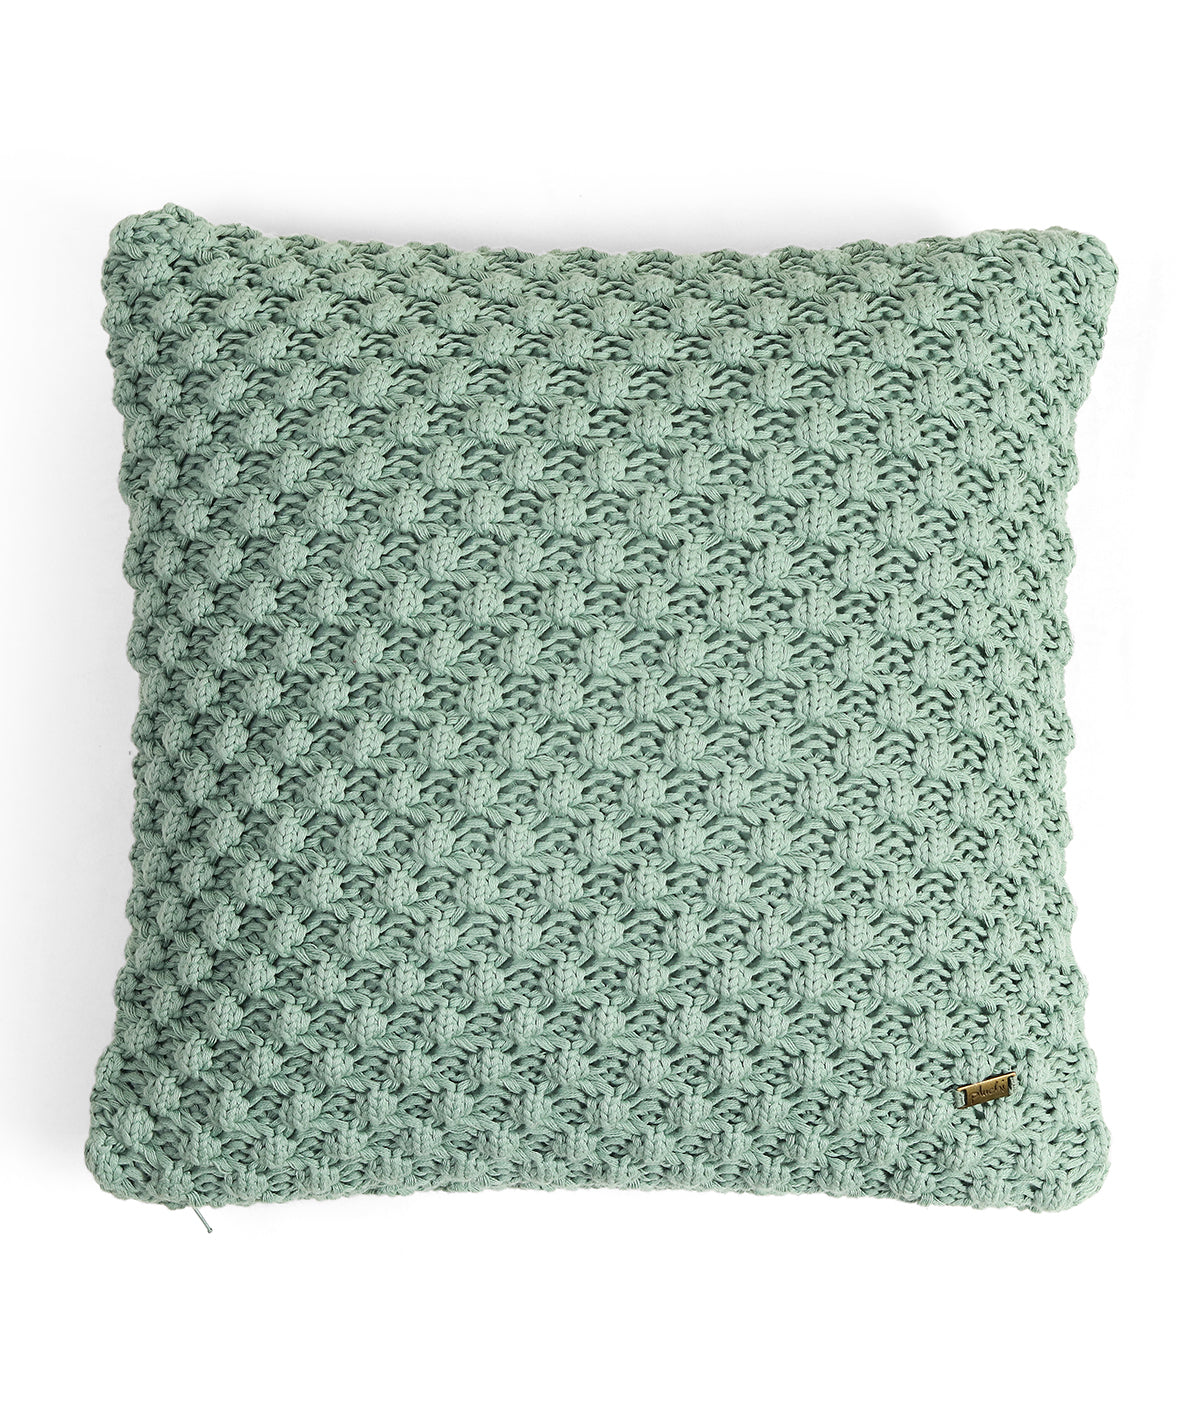 Popcorn Dusty Blue Cotton Knitted Decorative 16 X 16 Inches Cushion Cover